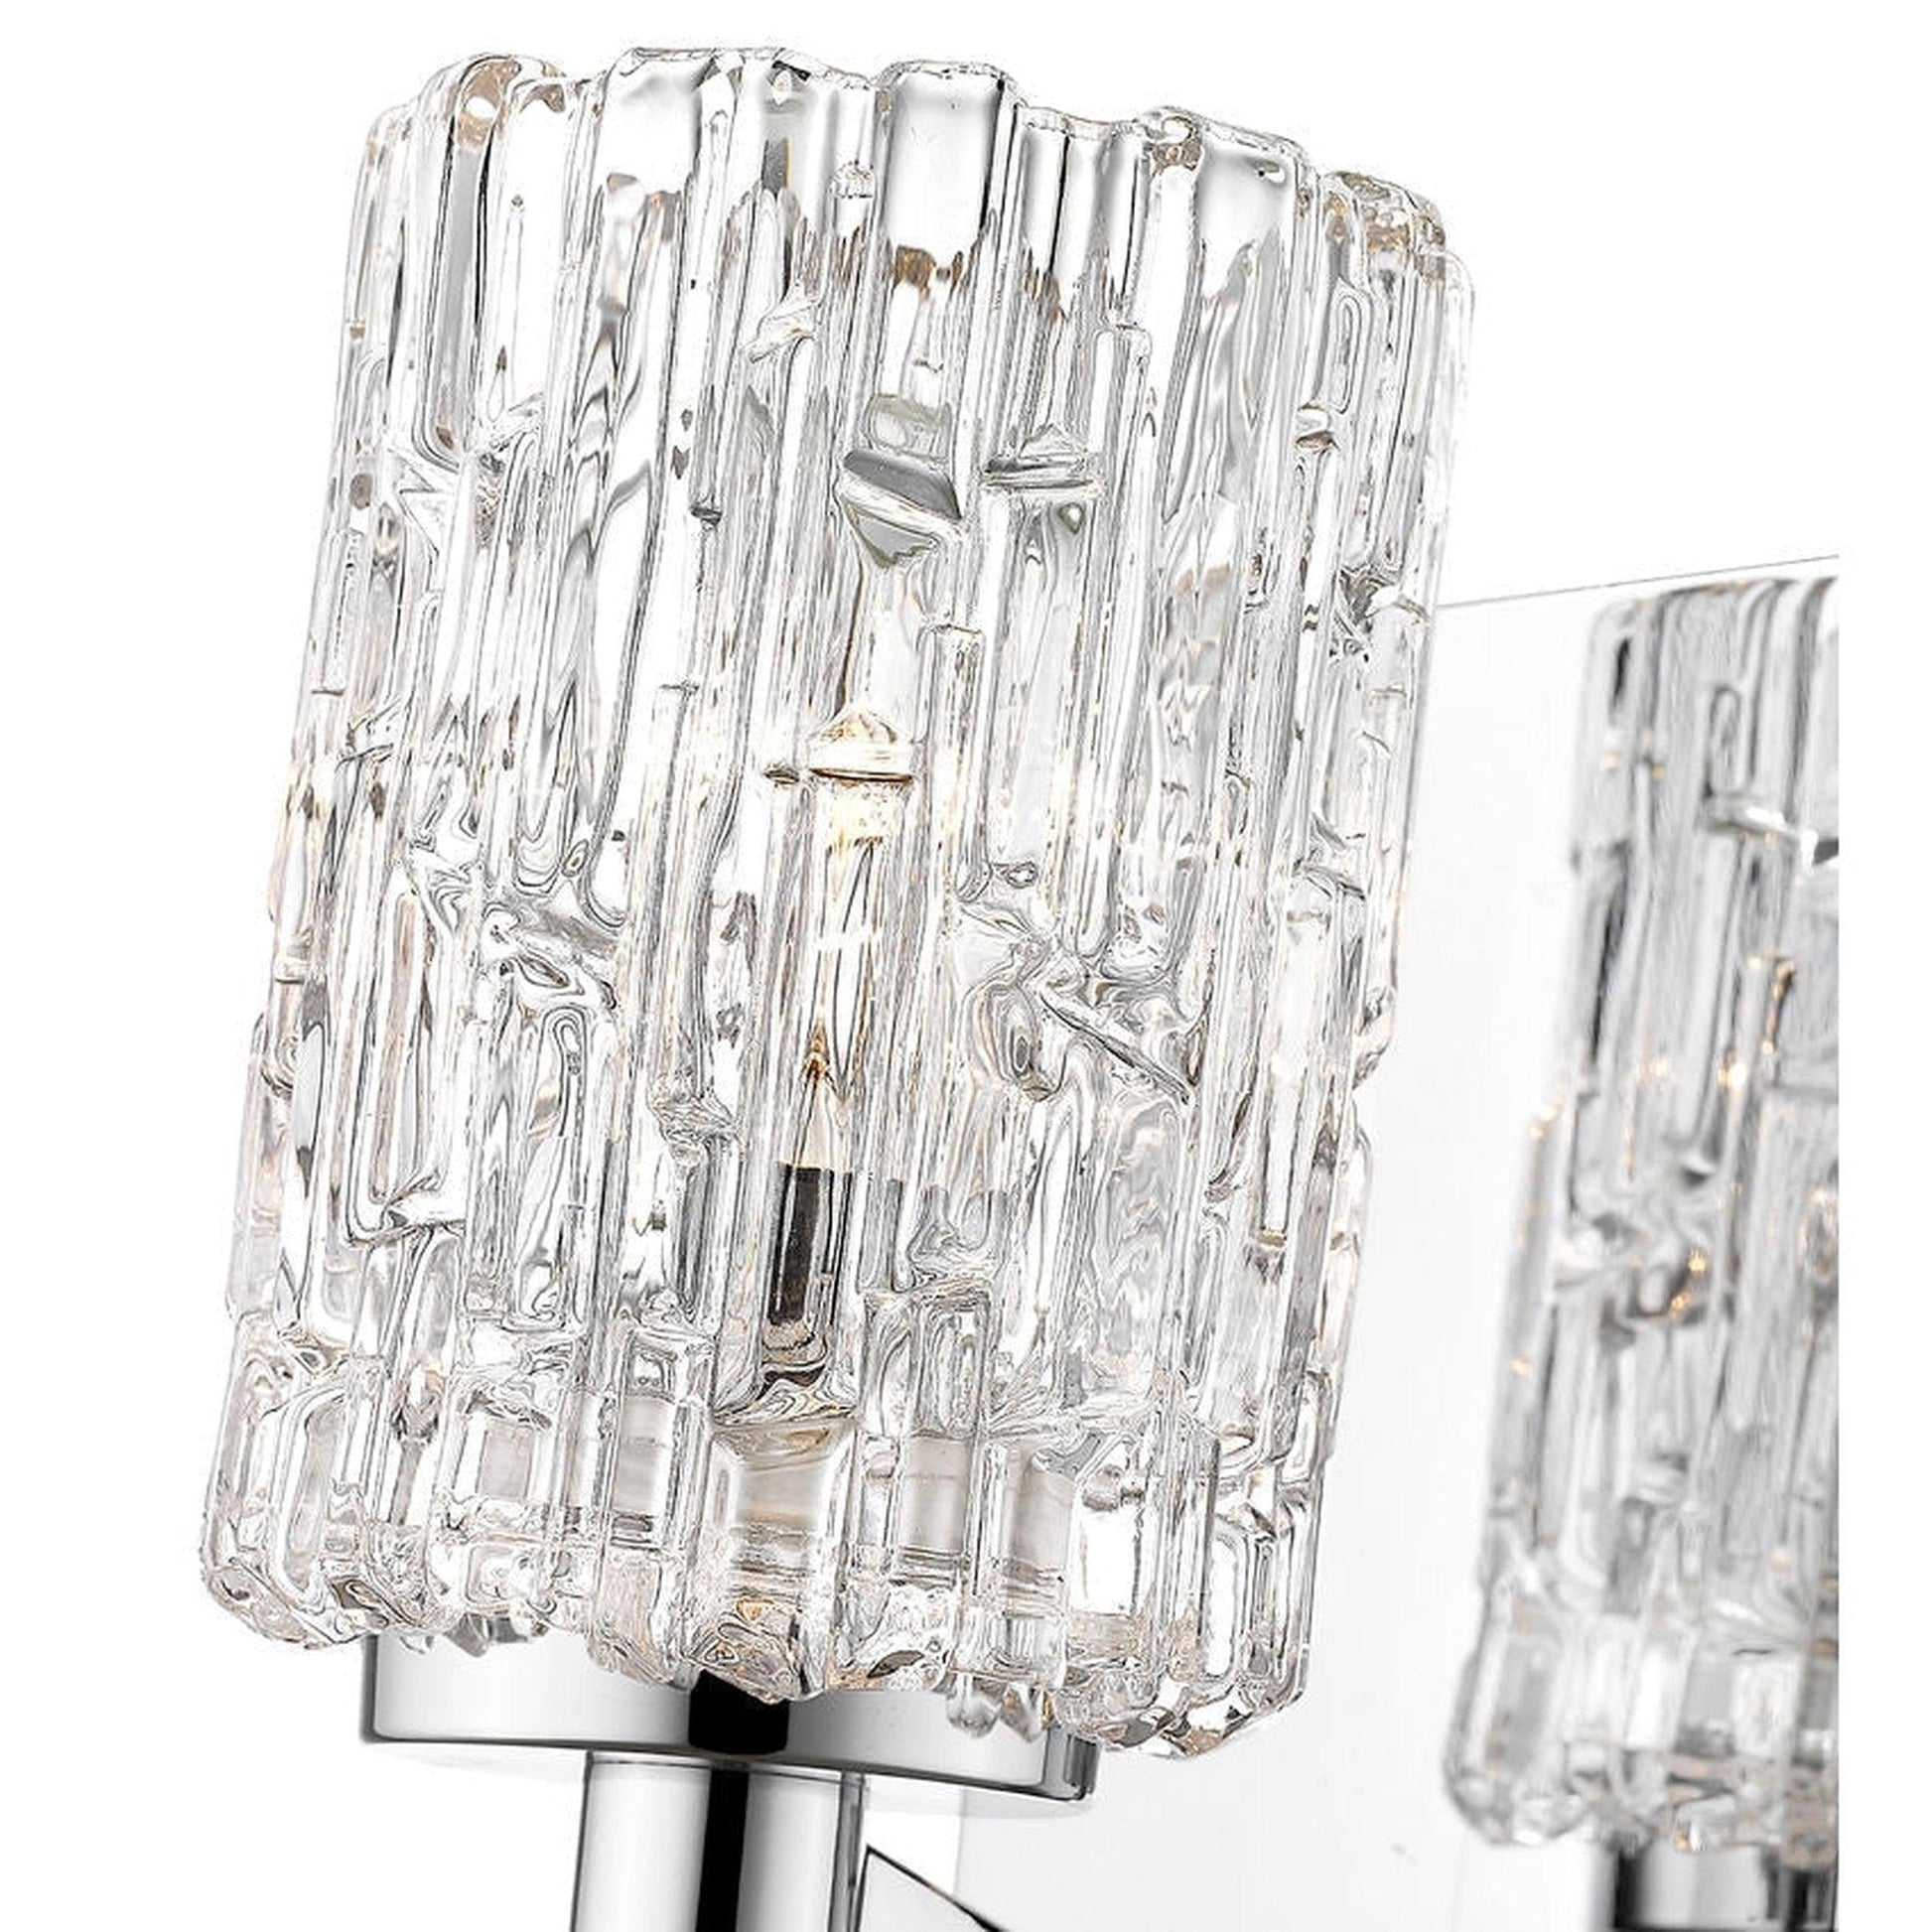 Z-Lite Aubrey 5" 1-Light Chrome Wall Sconce With Clear Glass Shade